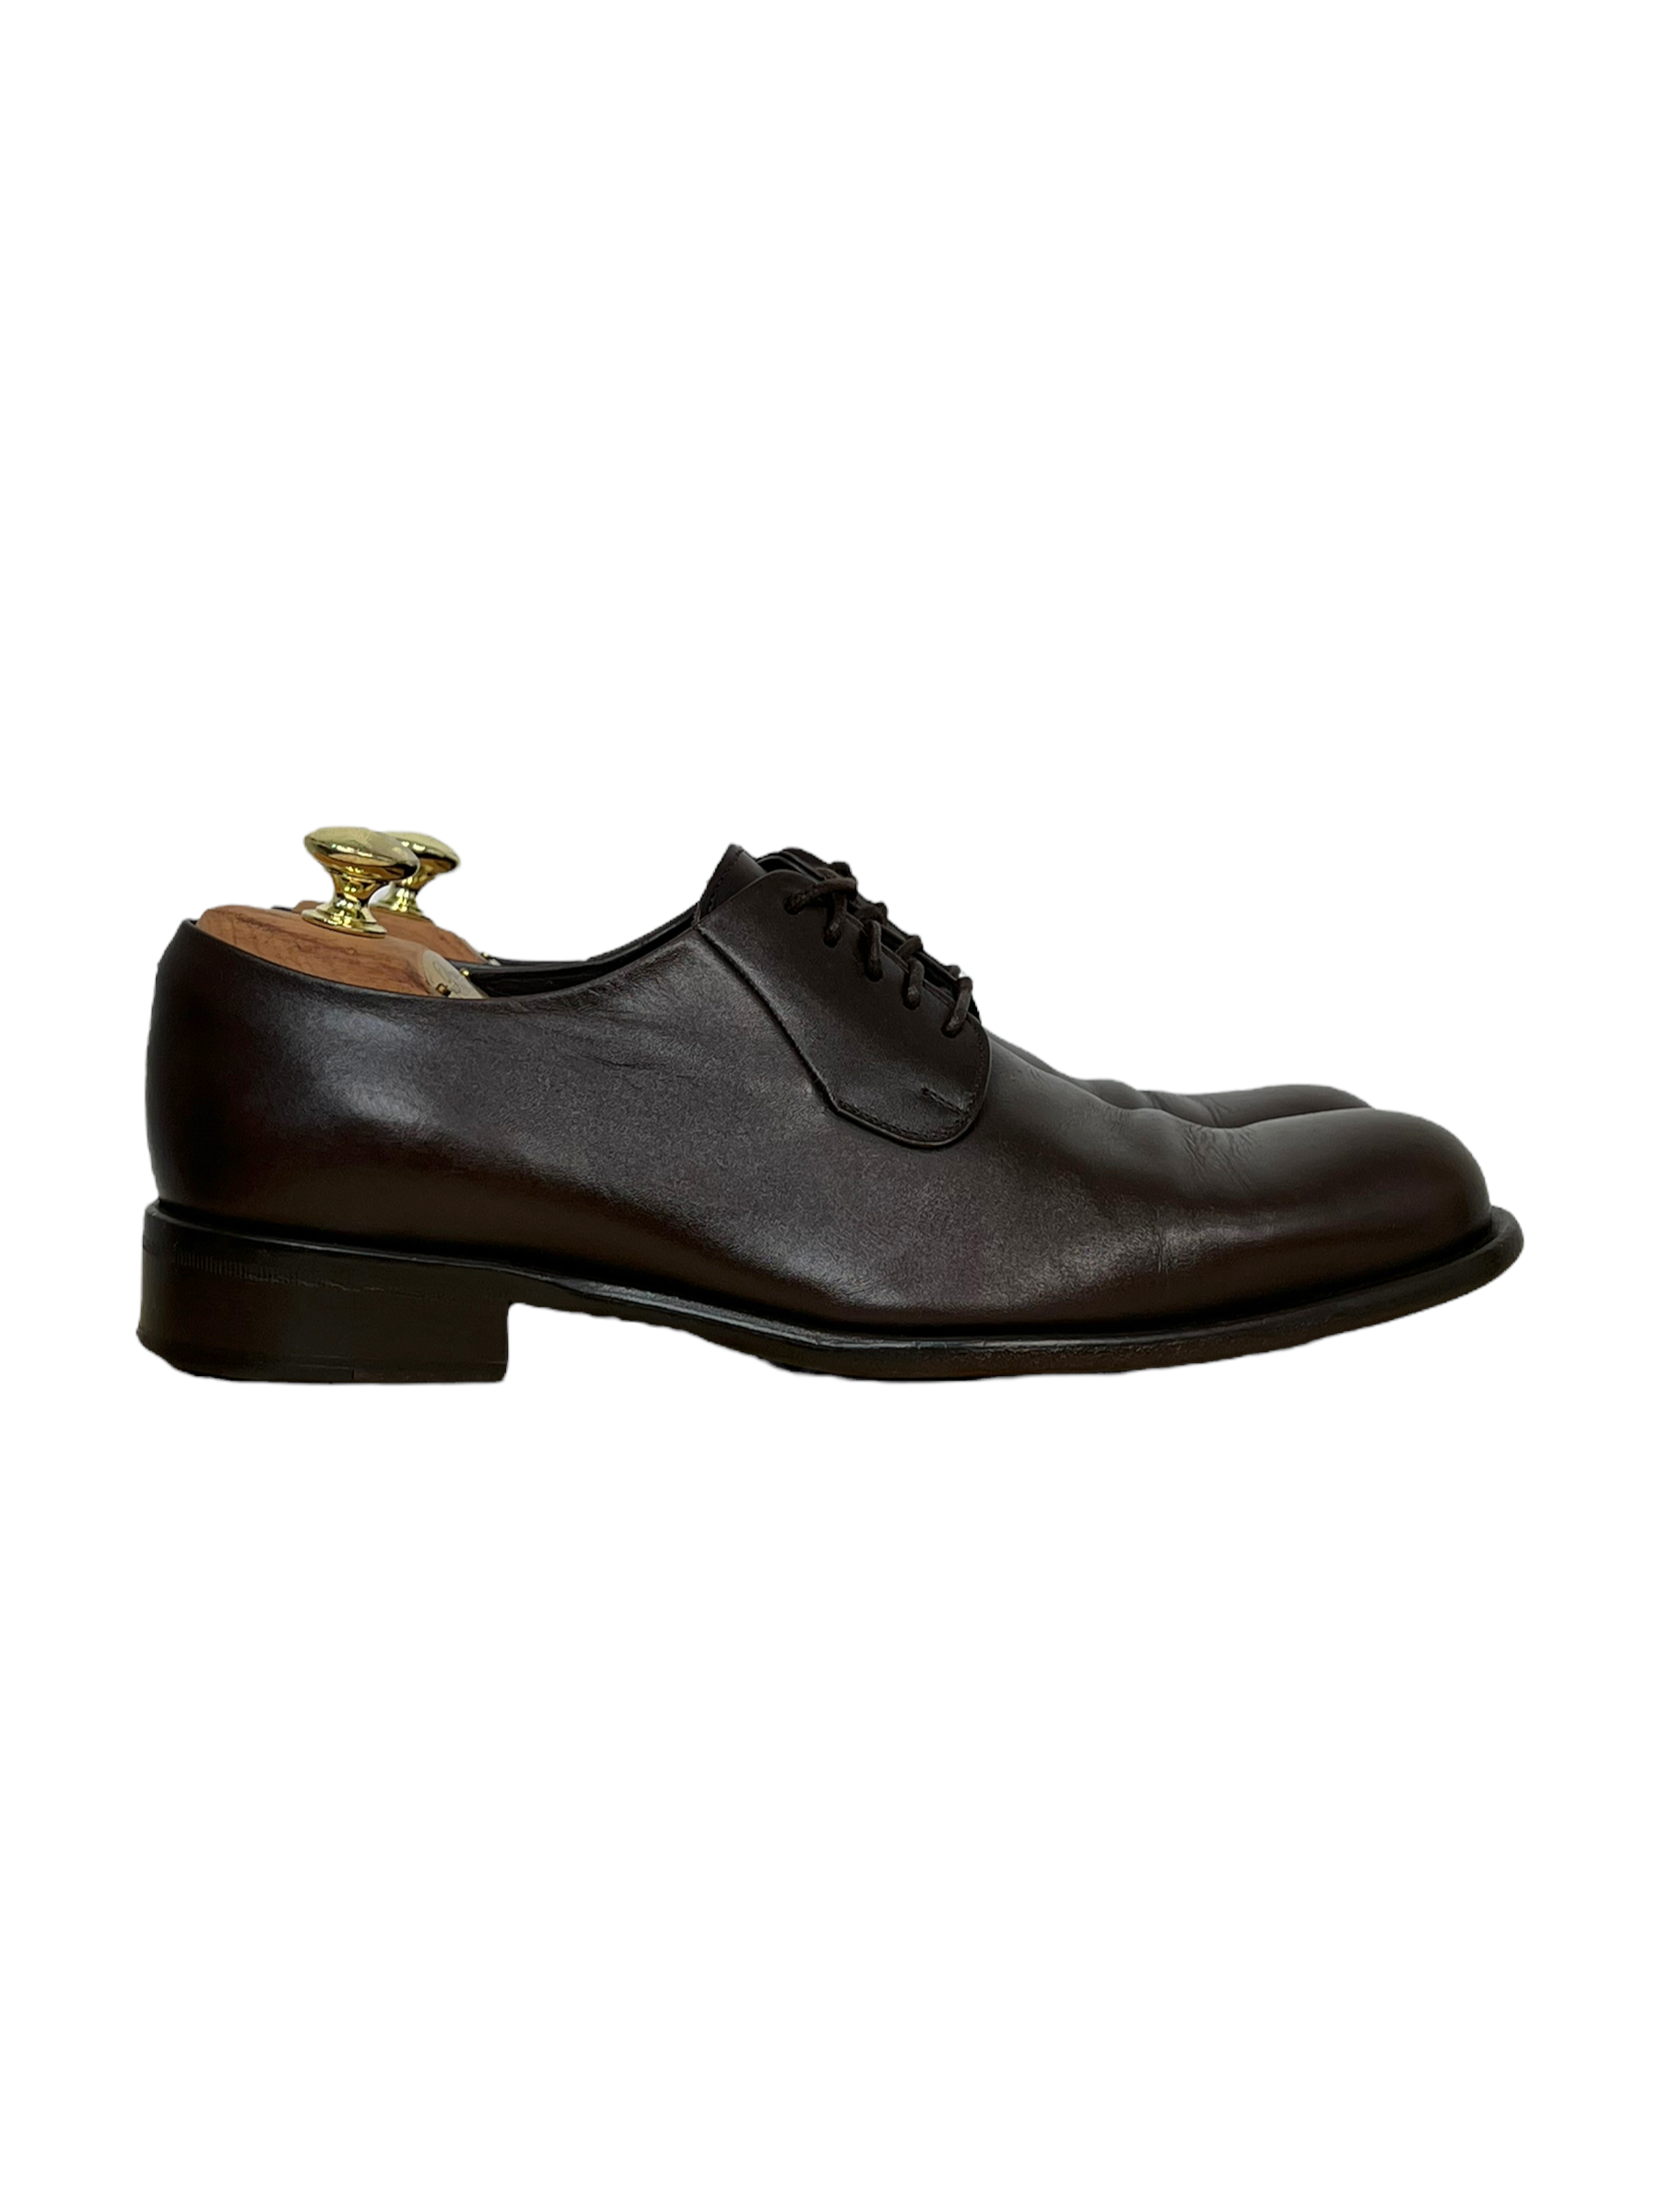 Giorgio Armani Brown Oxford Dress Shoes - Genuine Design Luxury Consignment for Men. New & Pre-Owned Clothing, Shoes, & Accessories. Calgary, Canada